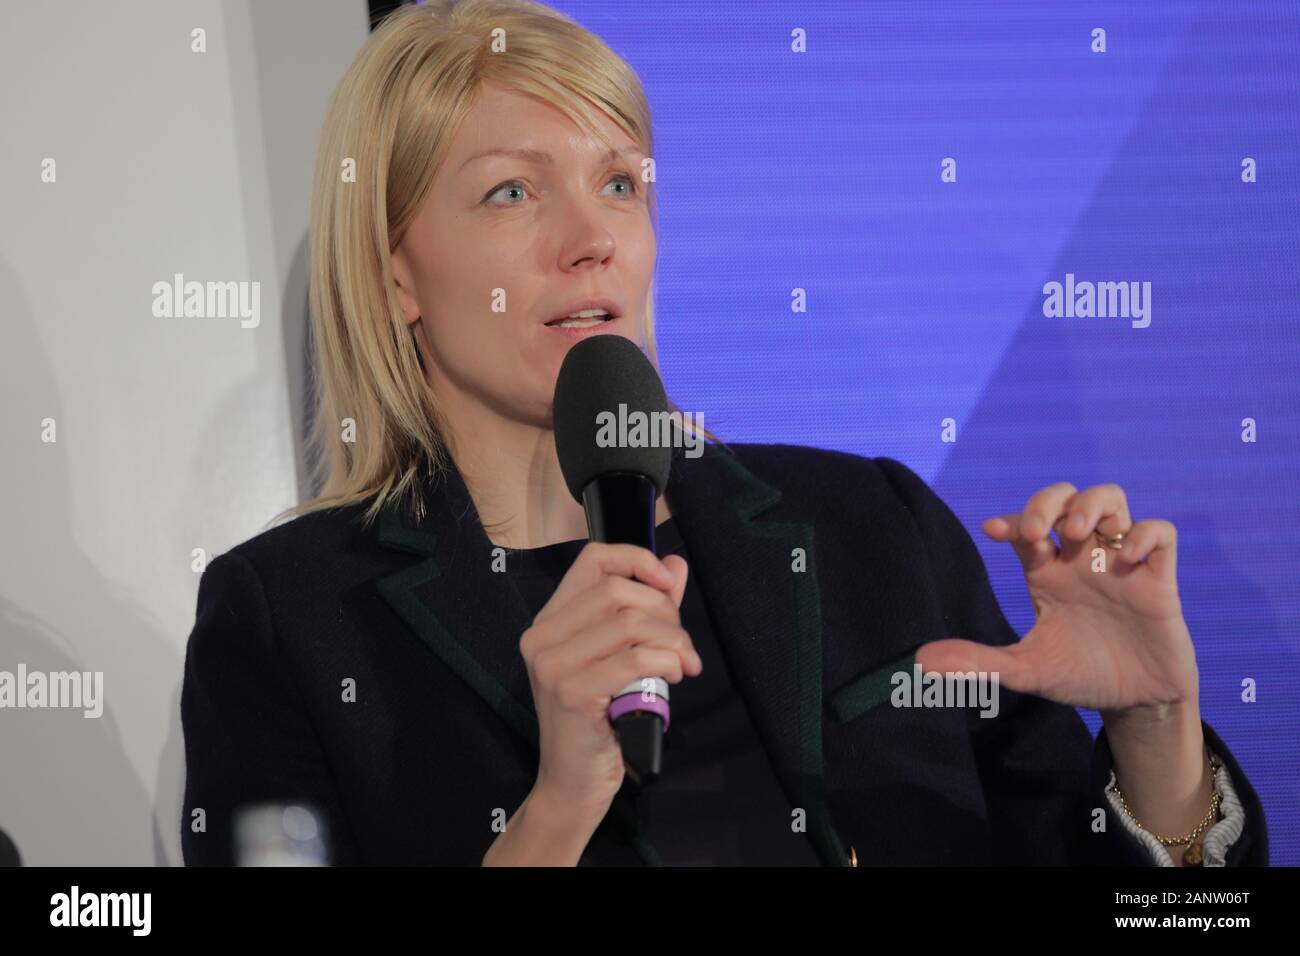 Munich, Germany. 19th Jan, 2020. Anna-Katharina Alex (Entrepreneur) speaks during a panel at DLD Munich Conference 2020, Europe's big innovation conference, Alte Kongresshalle, Munich, January 18-20, 2020 Picture Alliance for DLD/Hubert Burda Media | usage worldwide Credit: dpa/Alamy Live News Stock Photo